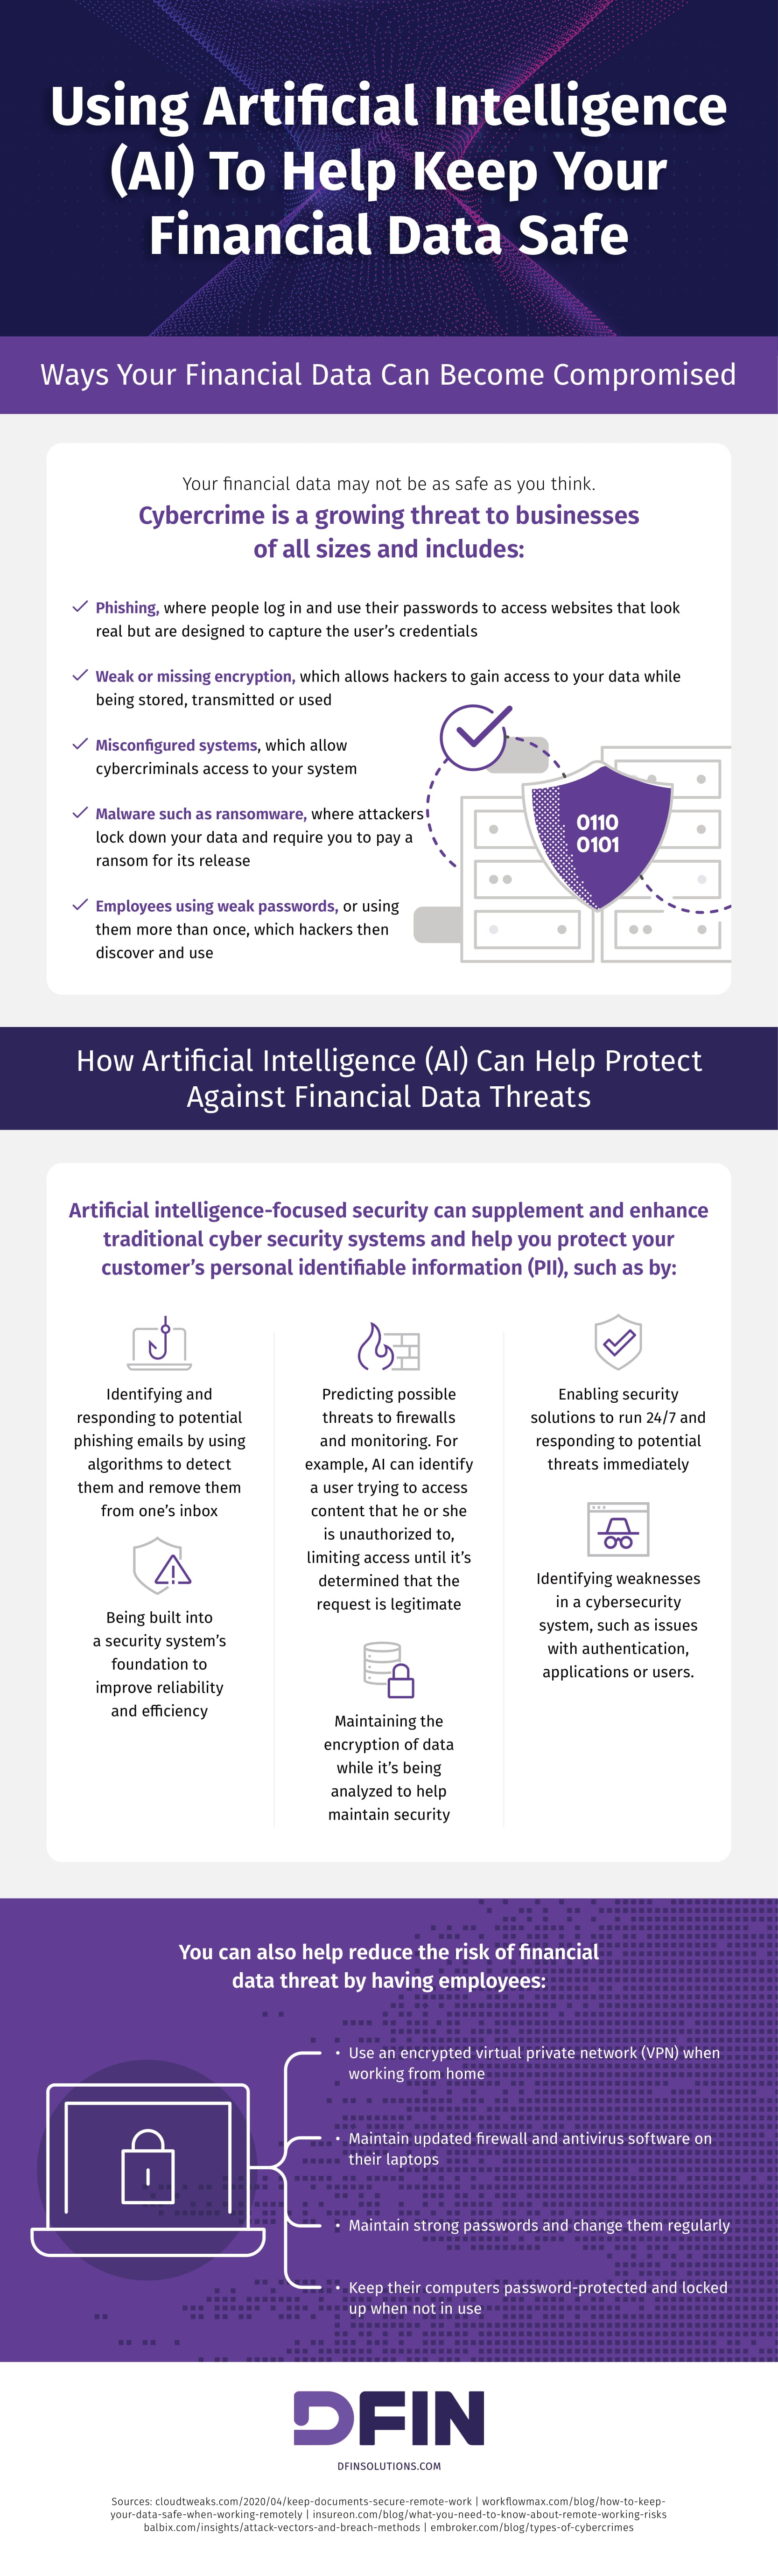 Using Artificial Intelligence To Help Keep Your Financial Data Safe 1